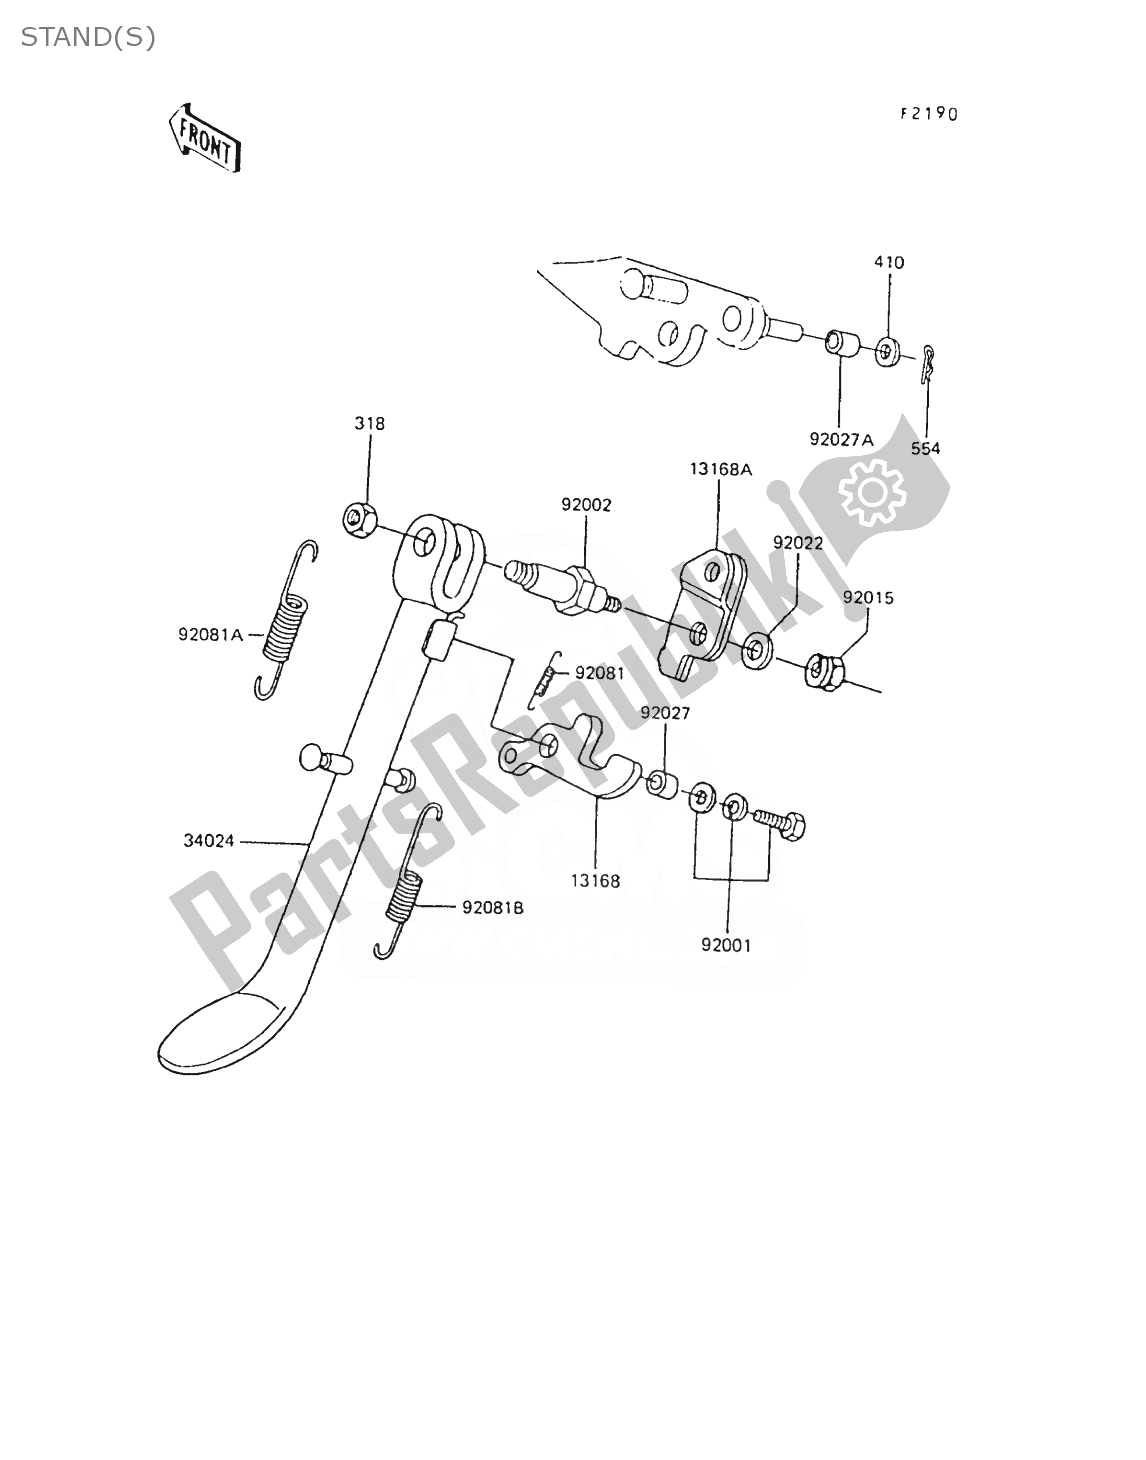 All parts for the Stand(s) of the Kawasaki AR 80 1990